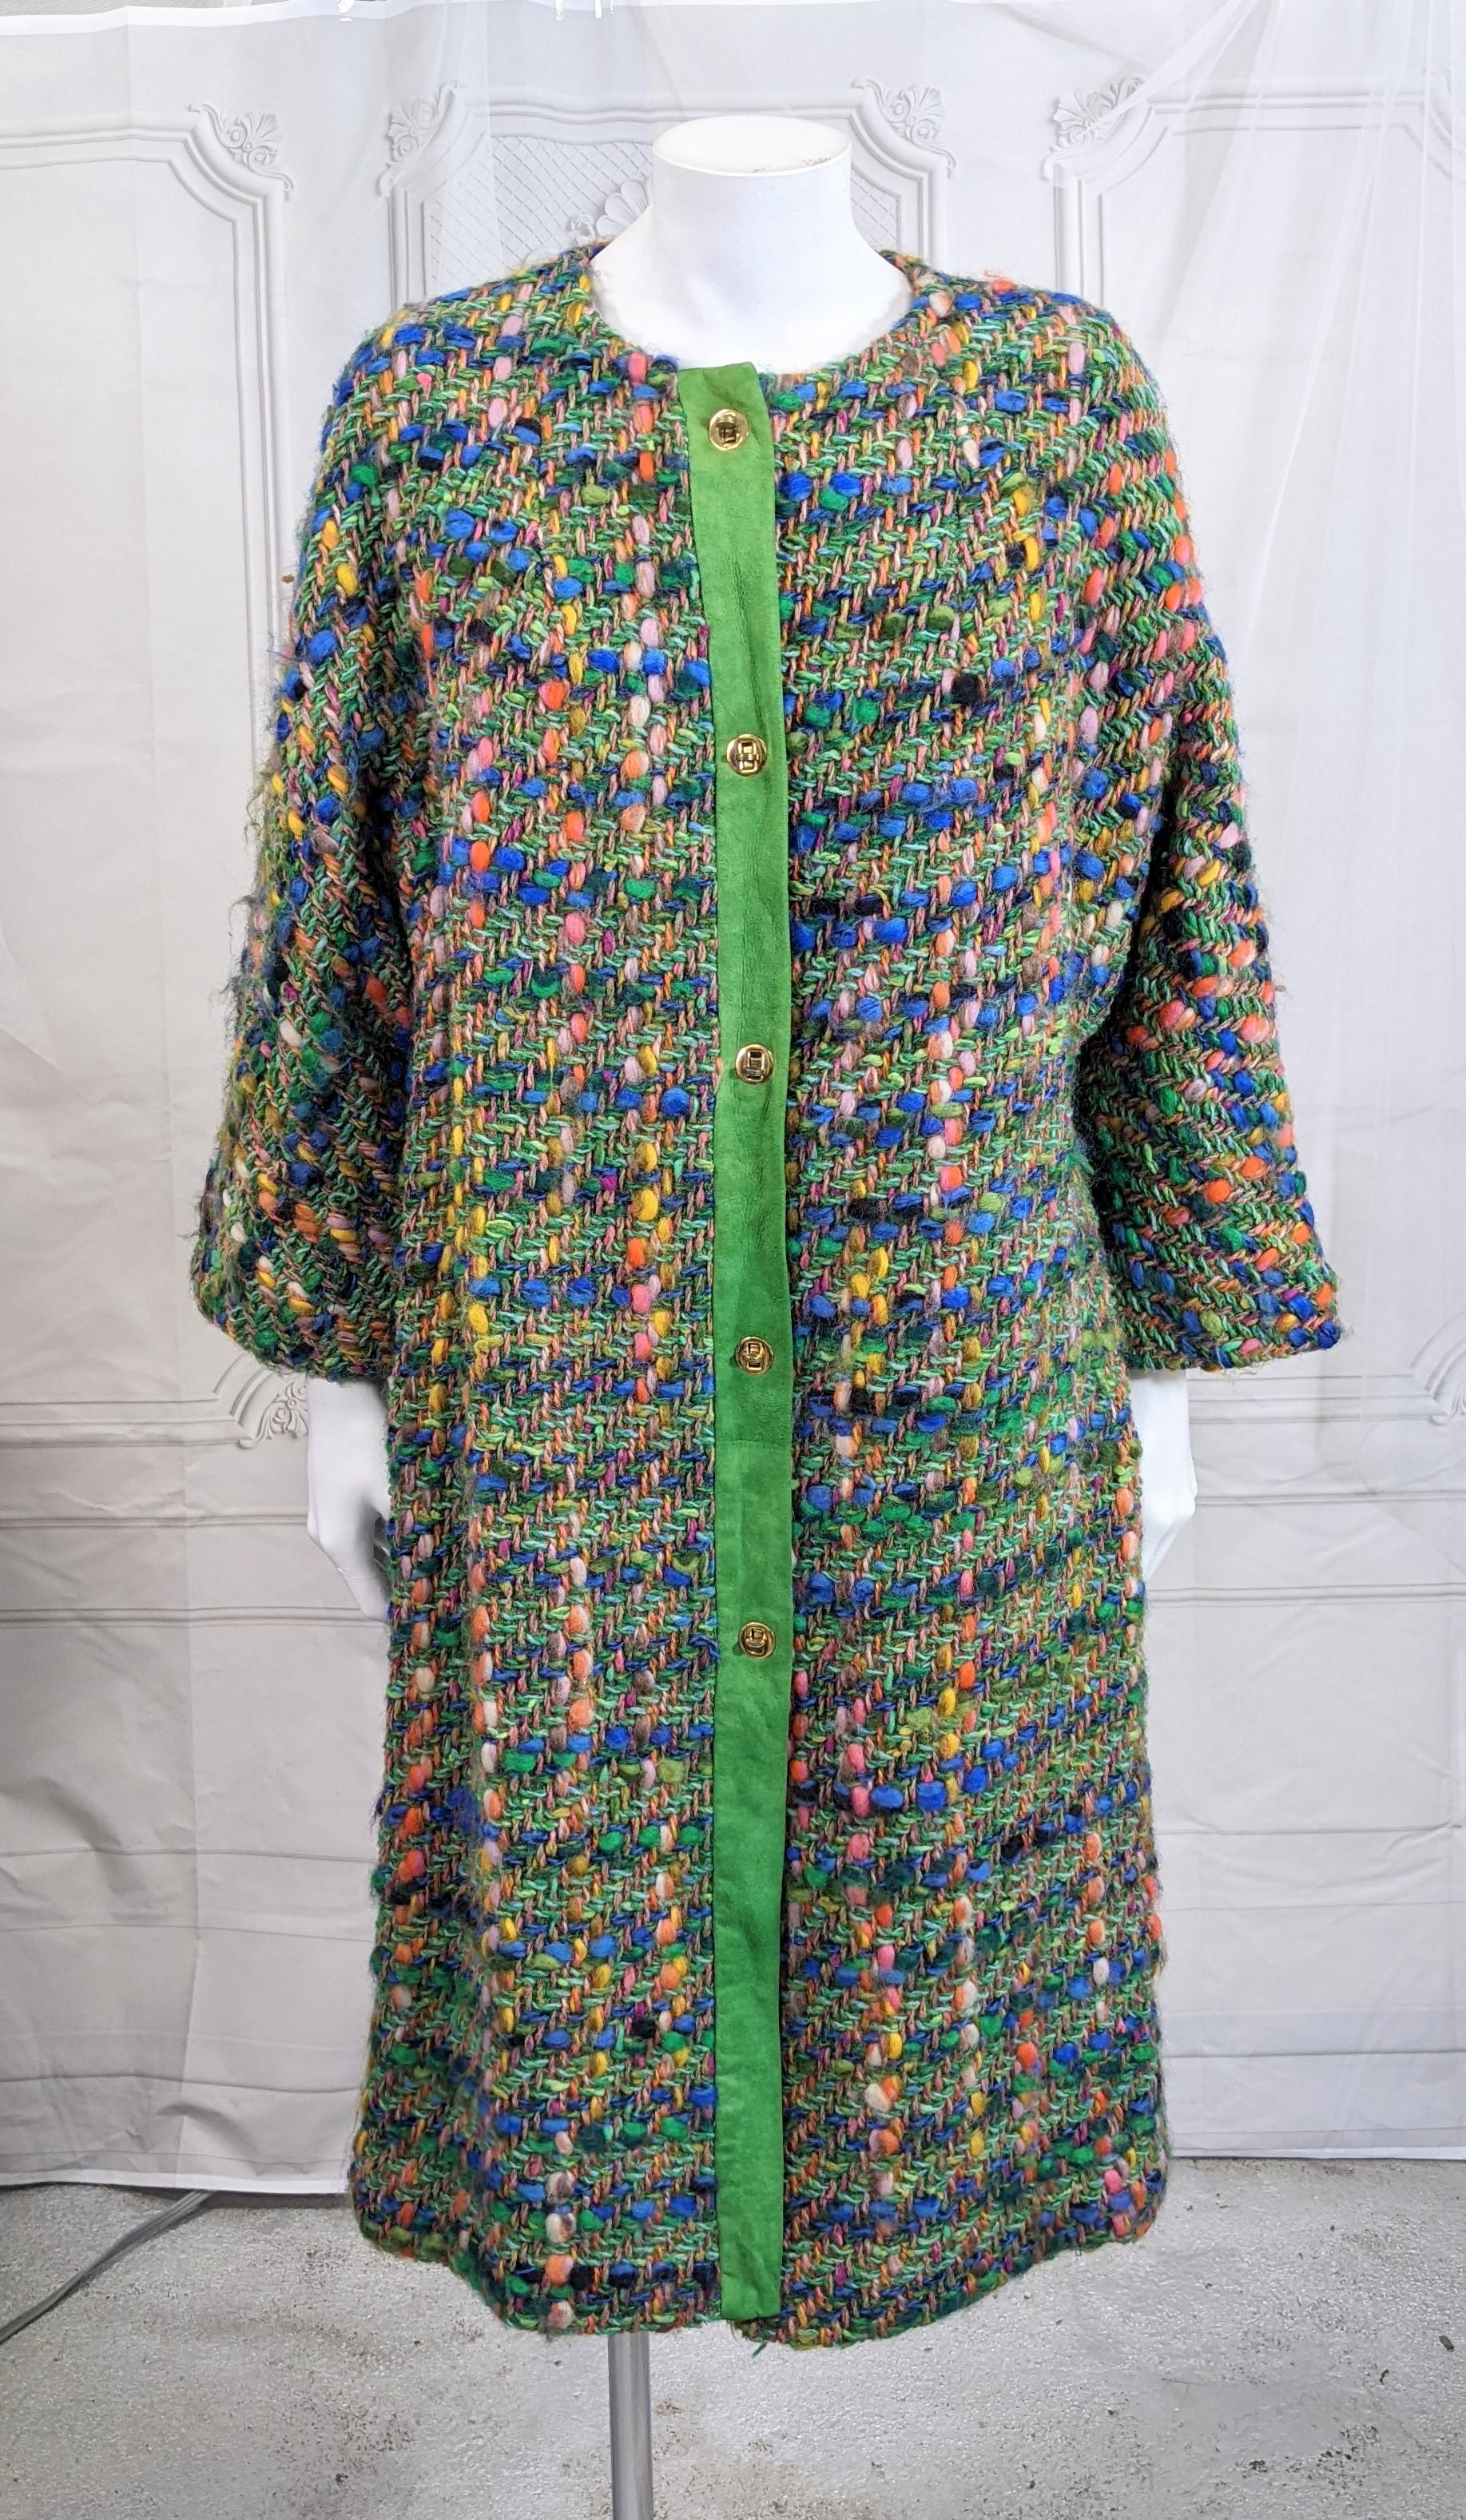 Easy Bonnie Cashin Technicolor Wool Tweed Coat with bright green suede trim and signature brass toggle trim. Easy cardigan coat straight shape with incredibly colorful nubby tweed.
Side pockets, deep dolman sleeves.
Marked: Size B, Medium.  Cashin